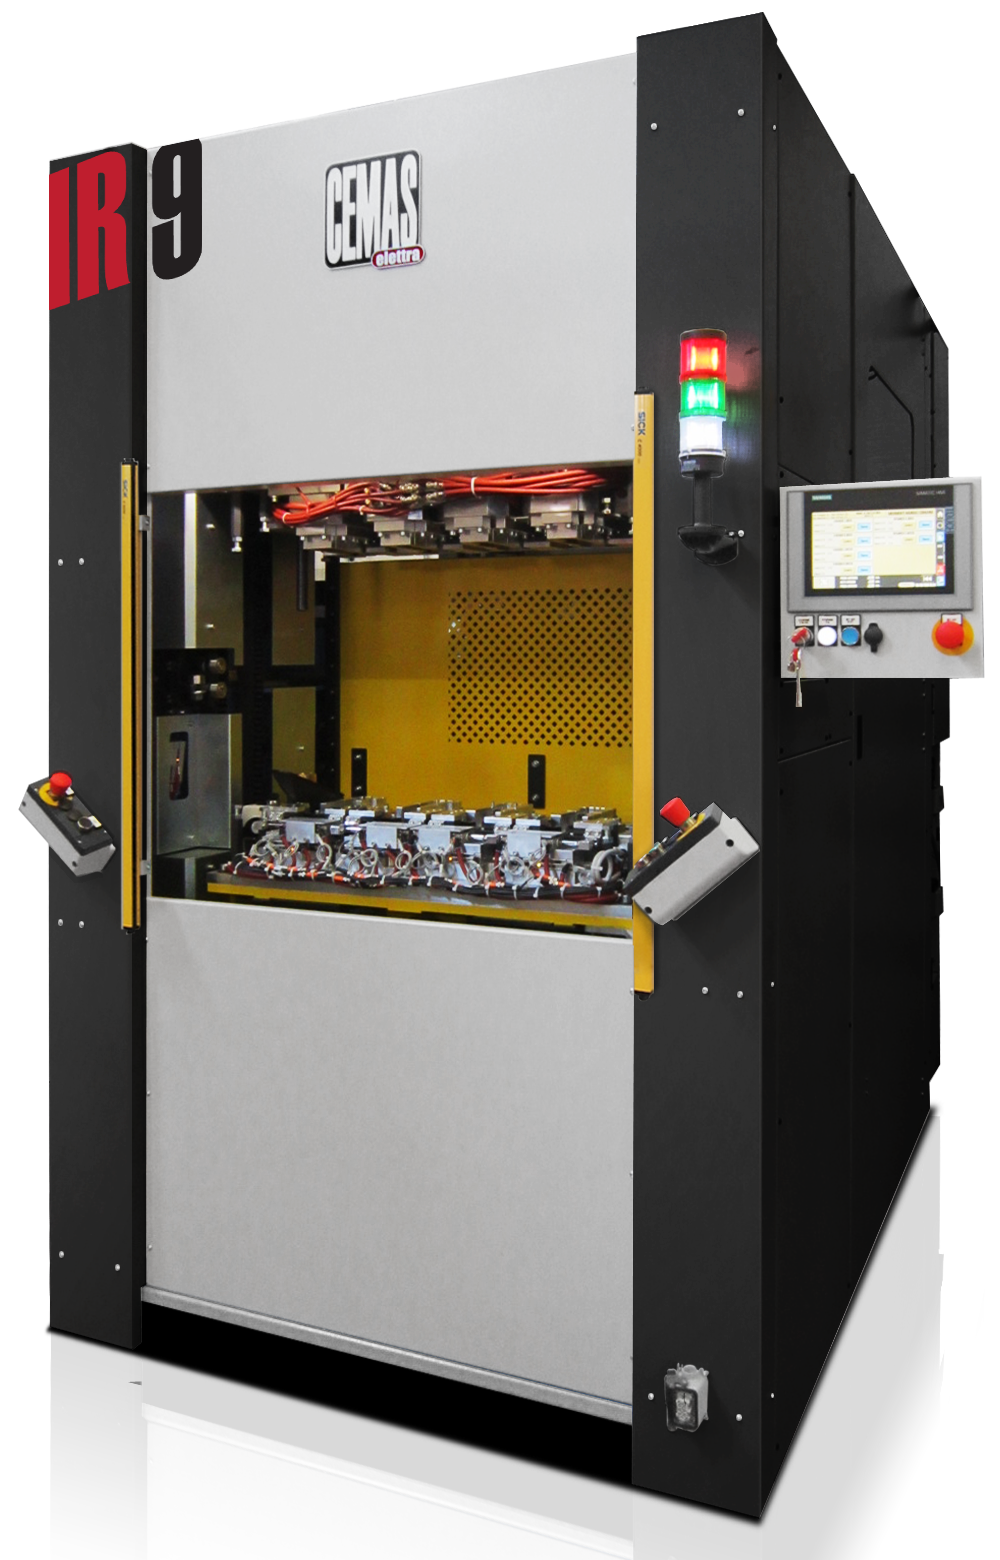 Suppliers of High Performance Hotplate Welding Machines UK